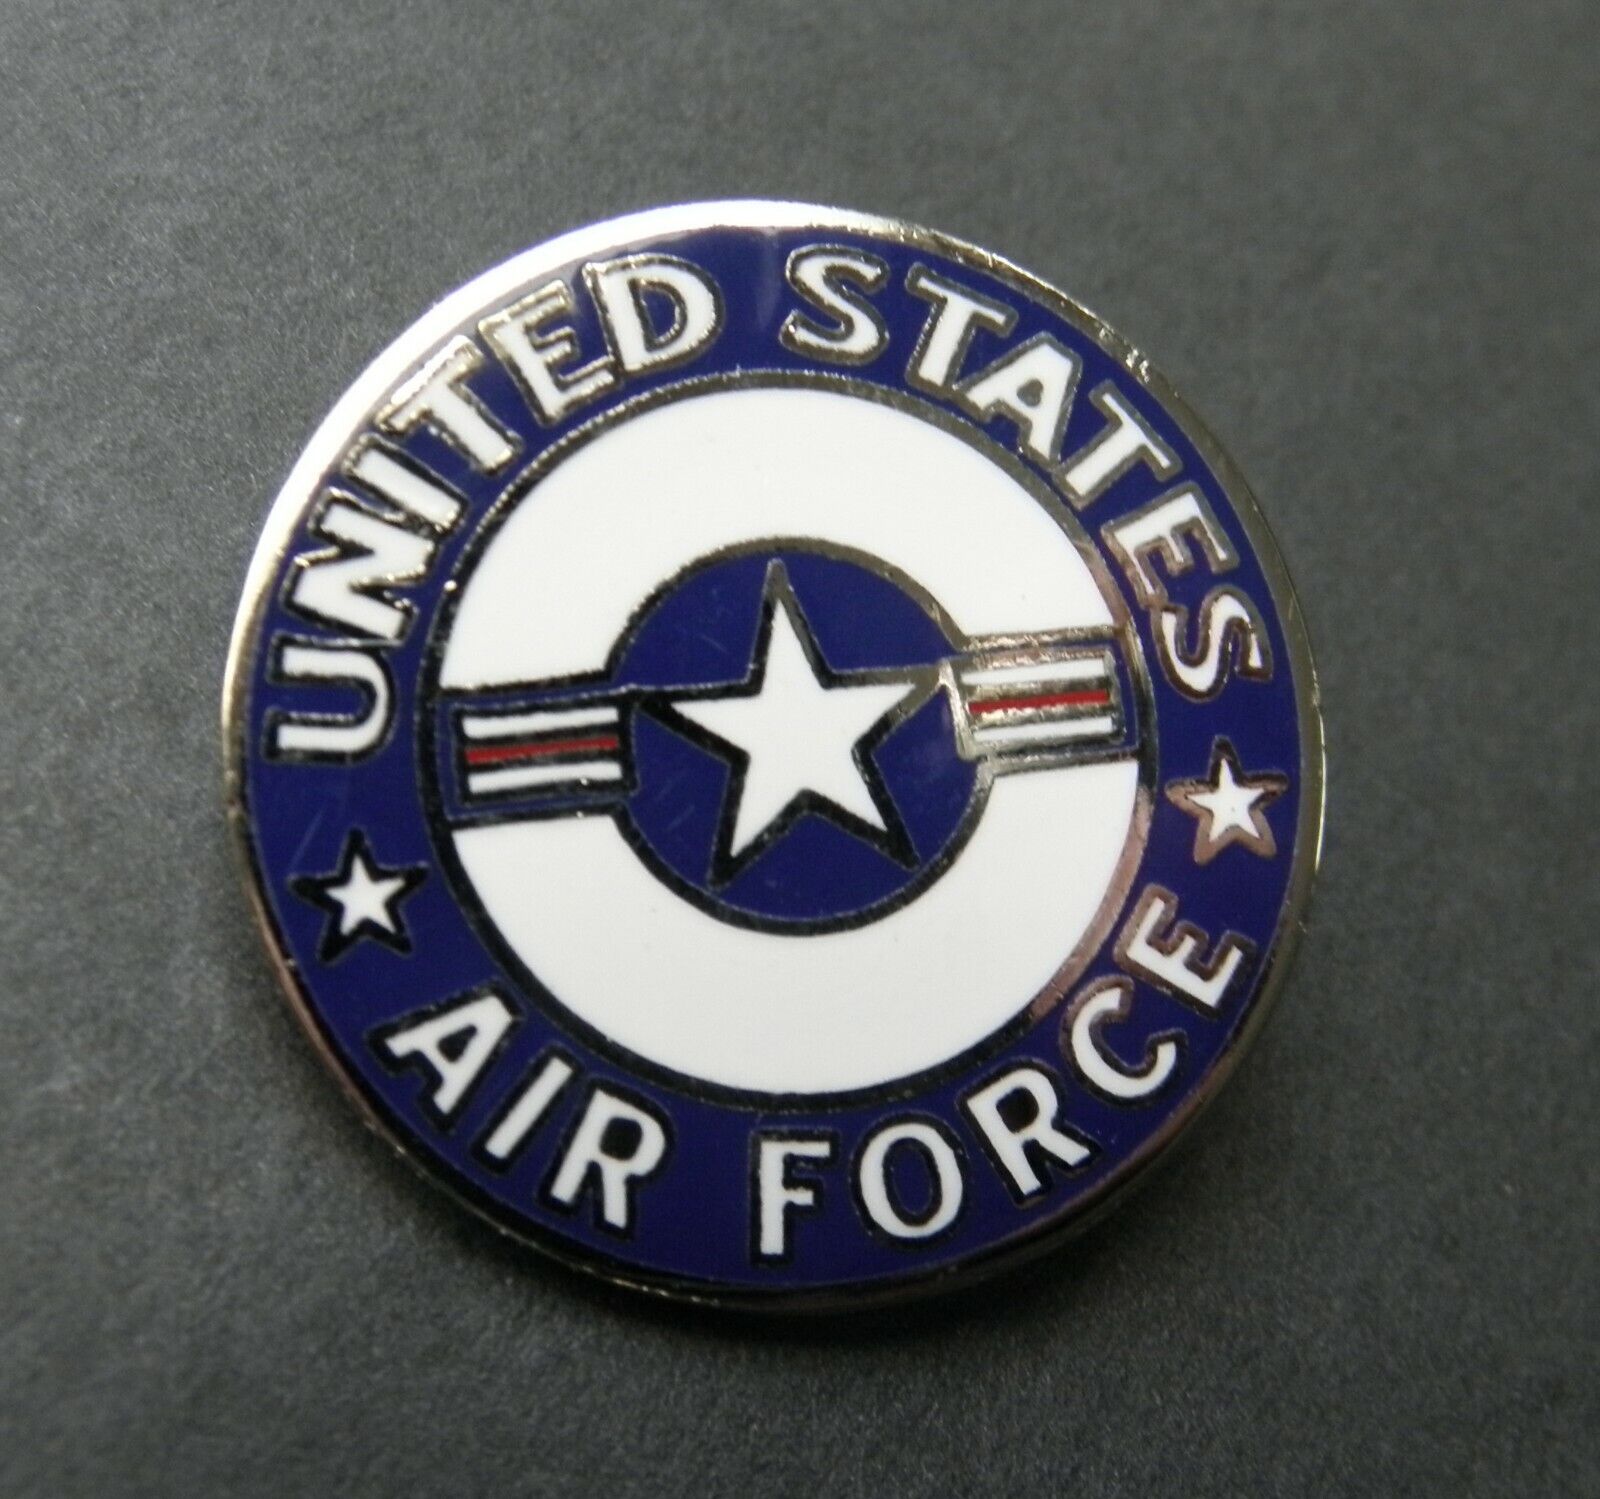 AIR FORCE USAF UNITED STATES LAPEL PIN BADGE 1 INCH